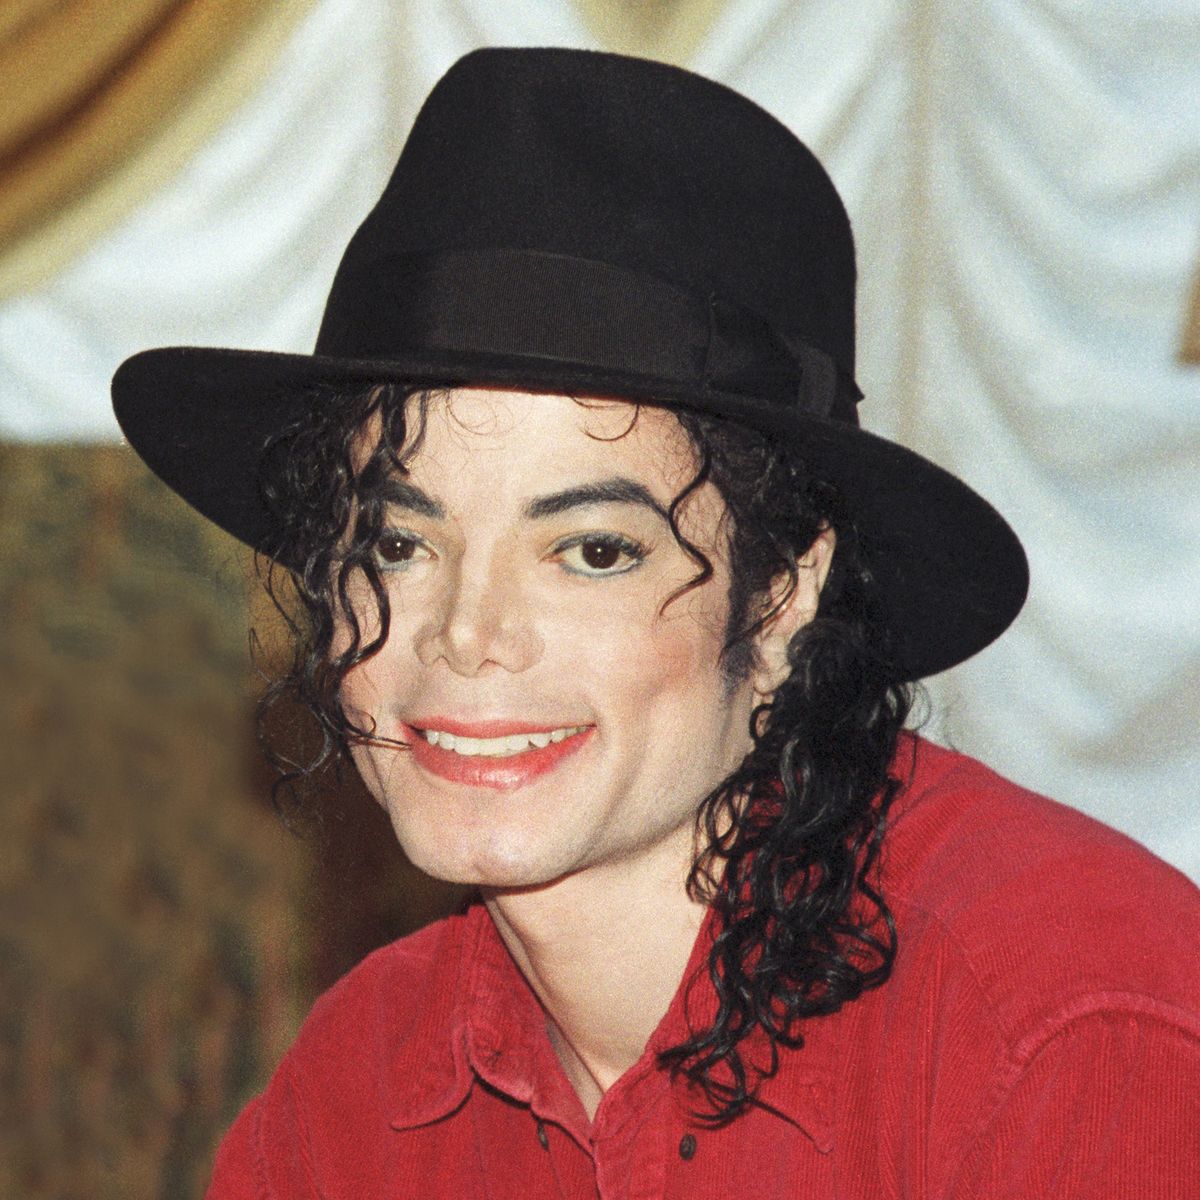 michael jackson history tourmichael jackson poses at a press conference before a date on his history world tour in 1996